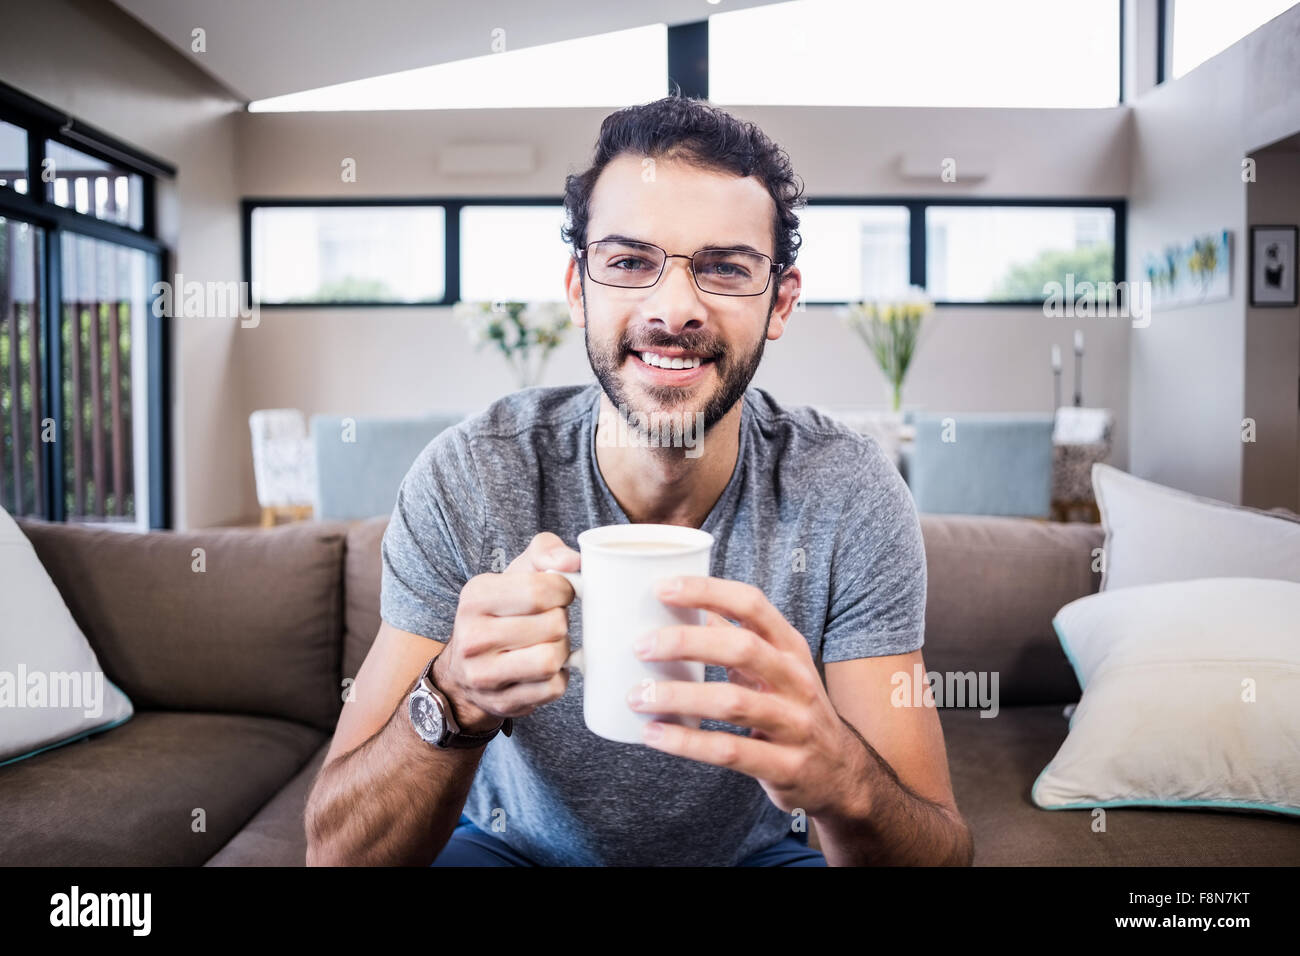 Portrait of smiling man holding white cup Banque D'Images